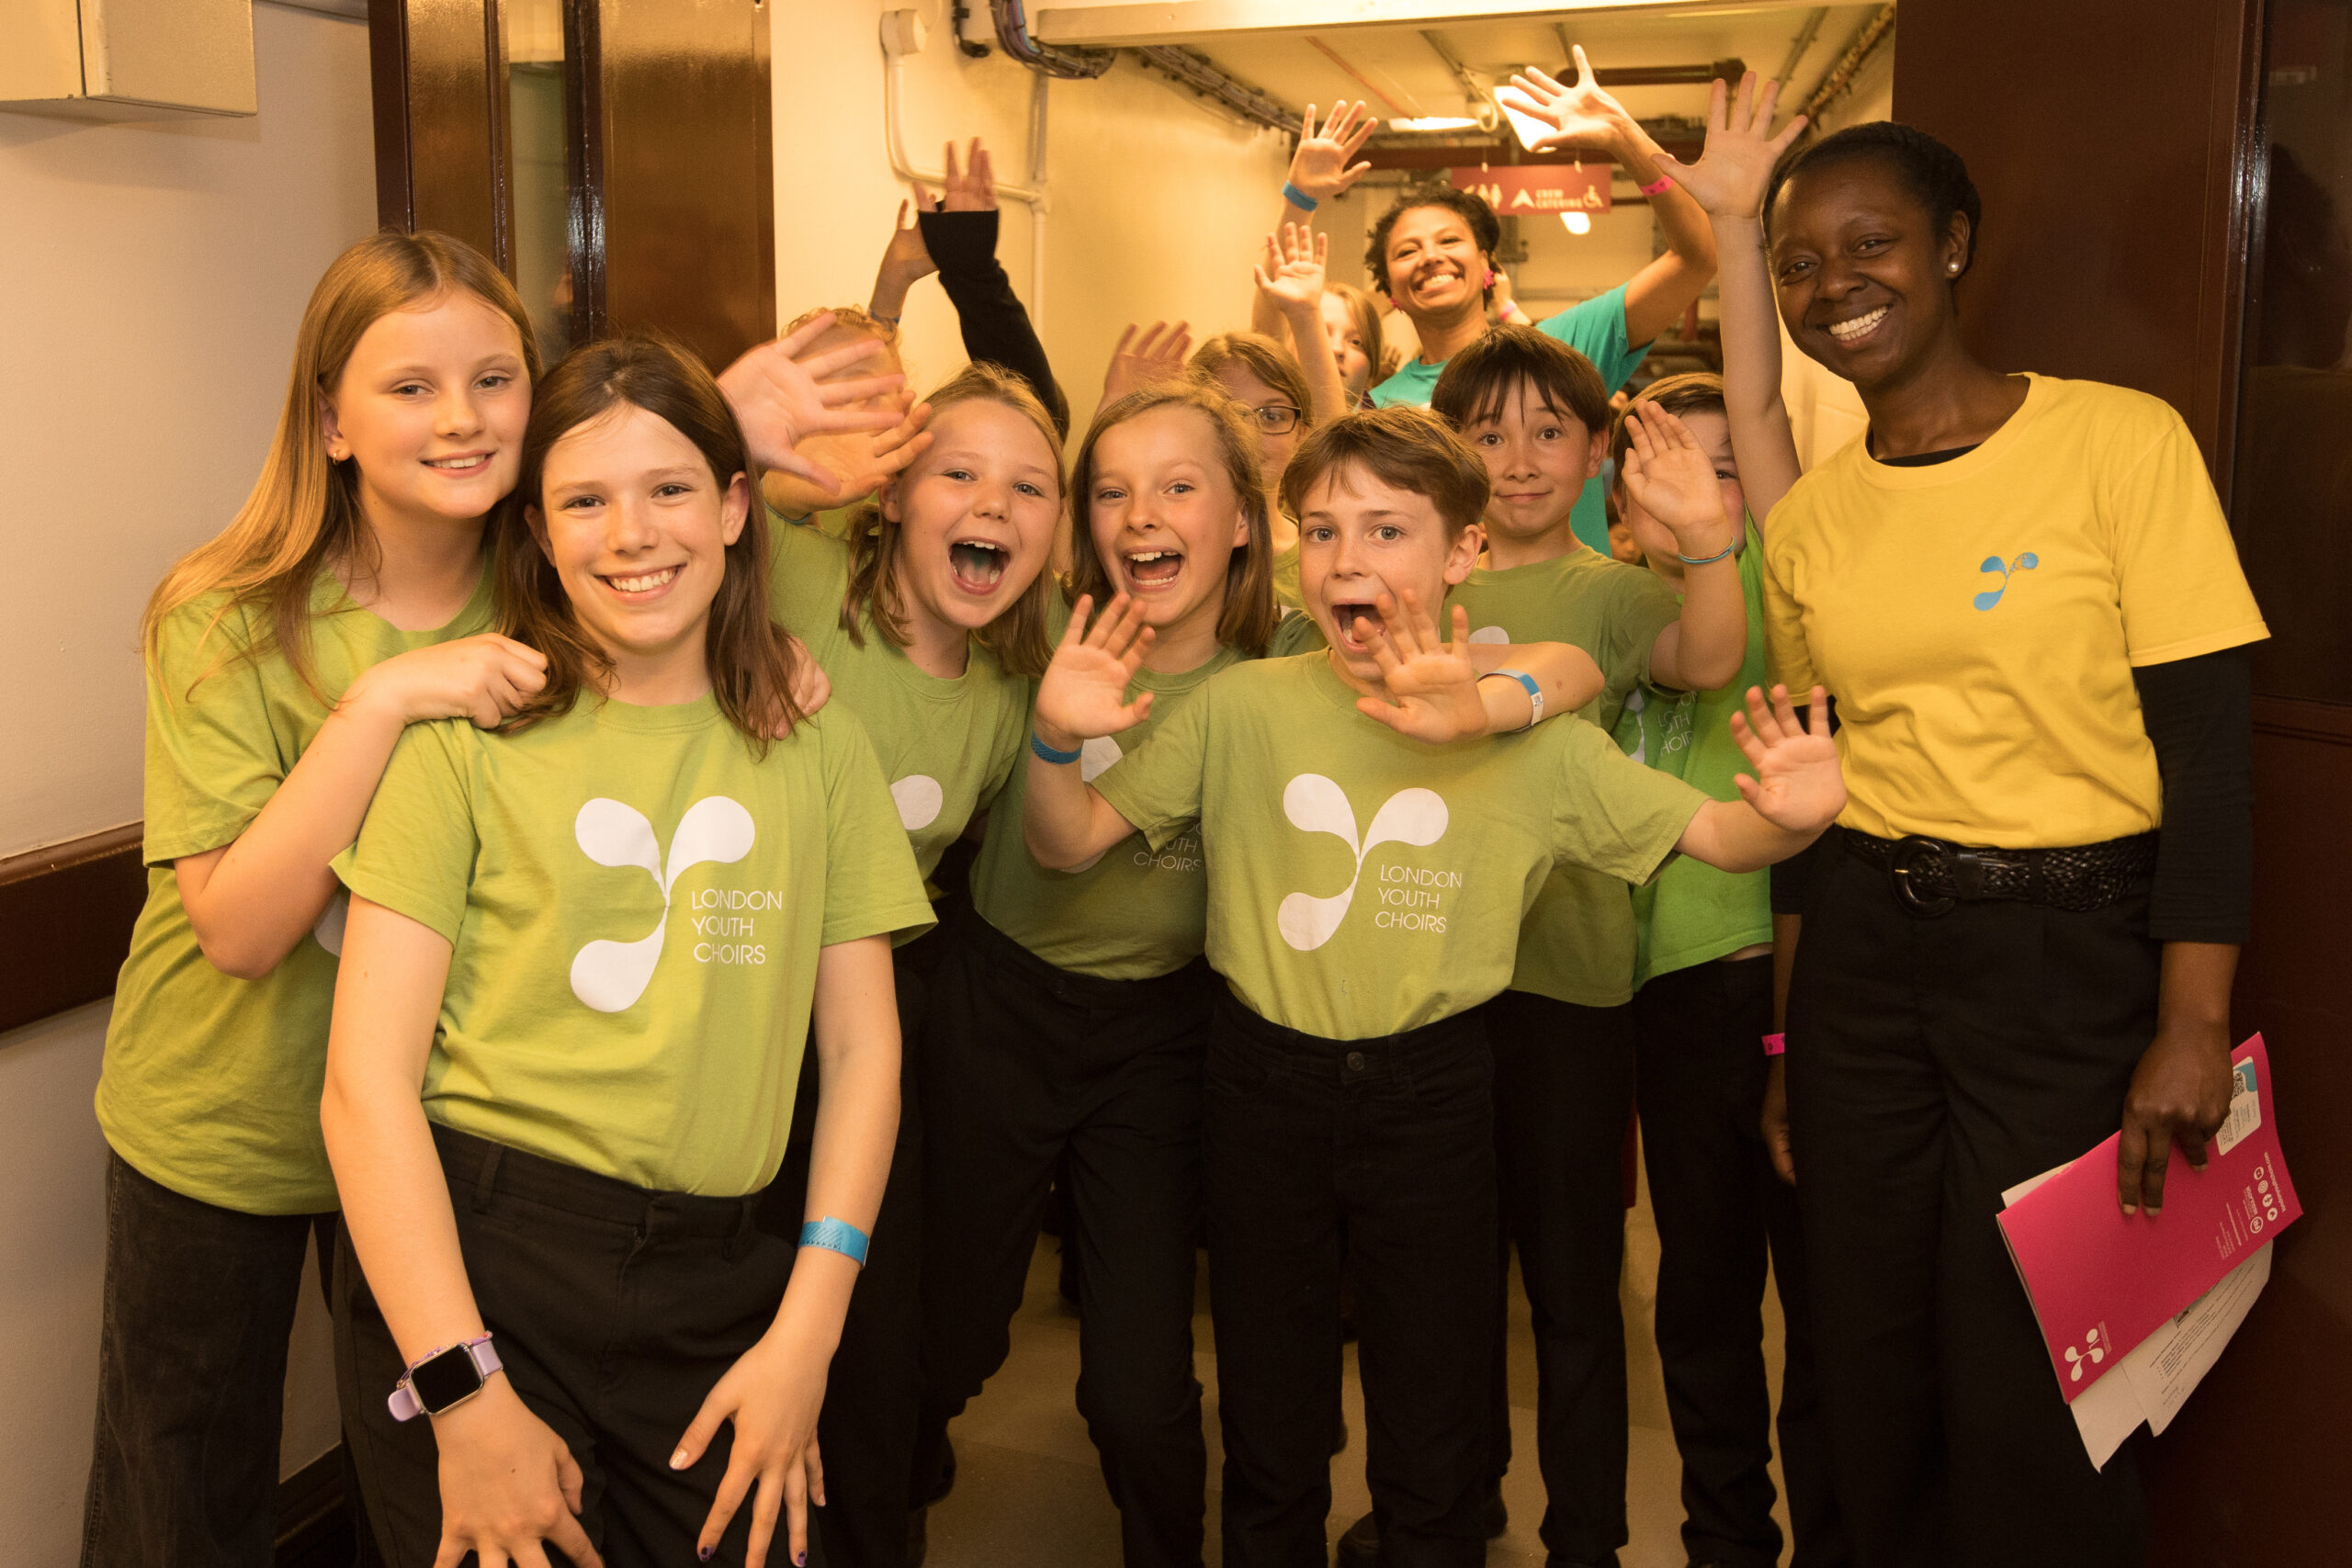 A group of LYC South East members age 7-11 wearing green LYC T shirts and black trousers, with a staff member in a yellow T shirt and another staff member in the background, smiling and making silly faces at the camera backstage at the royal albert hall